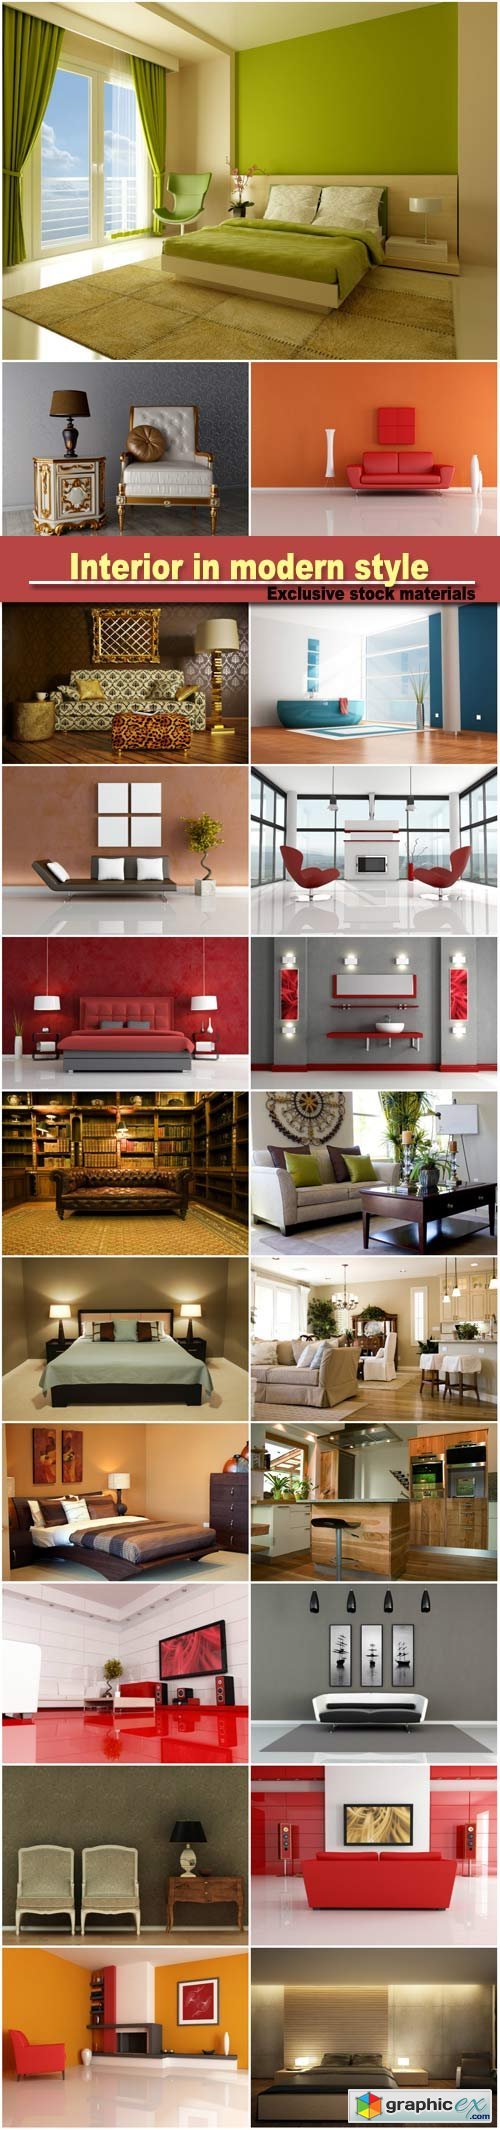 Interior in modern style, armchairs, sofas, bedroom